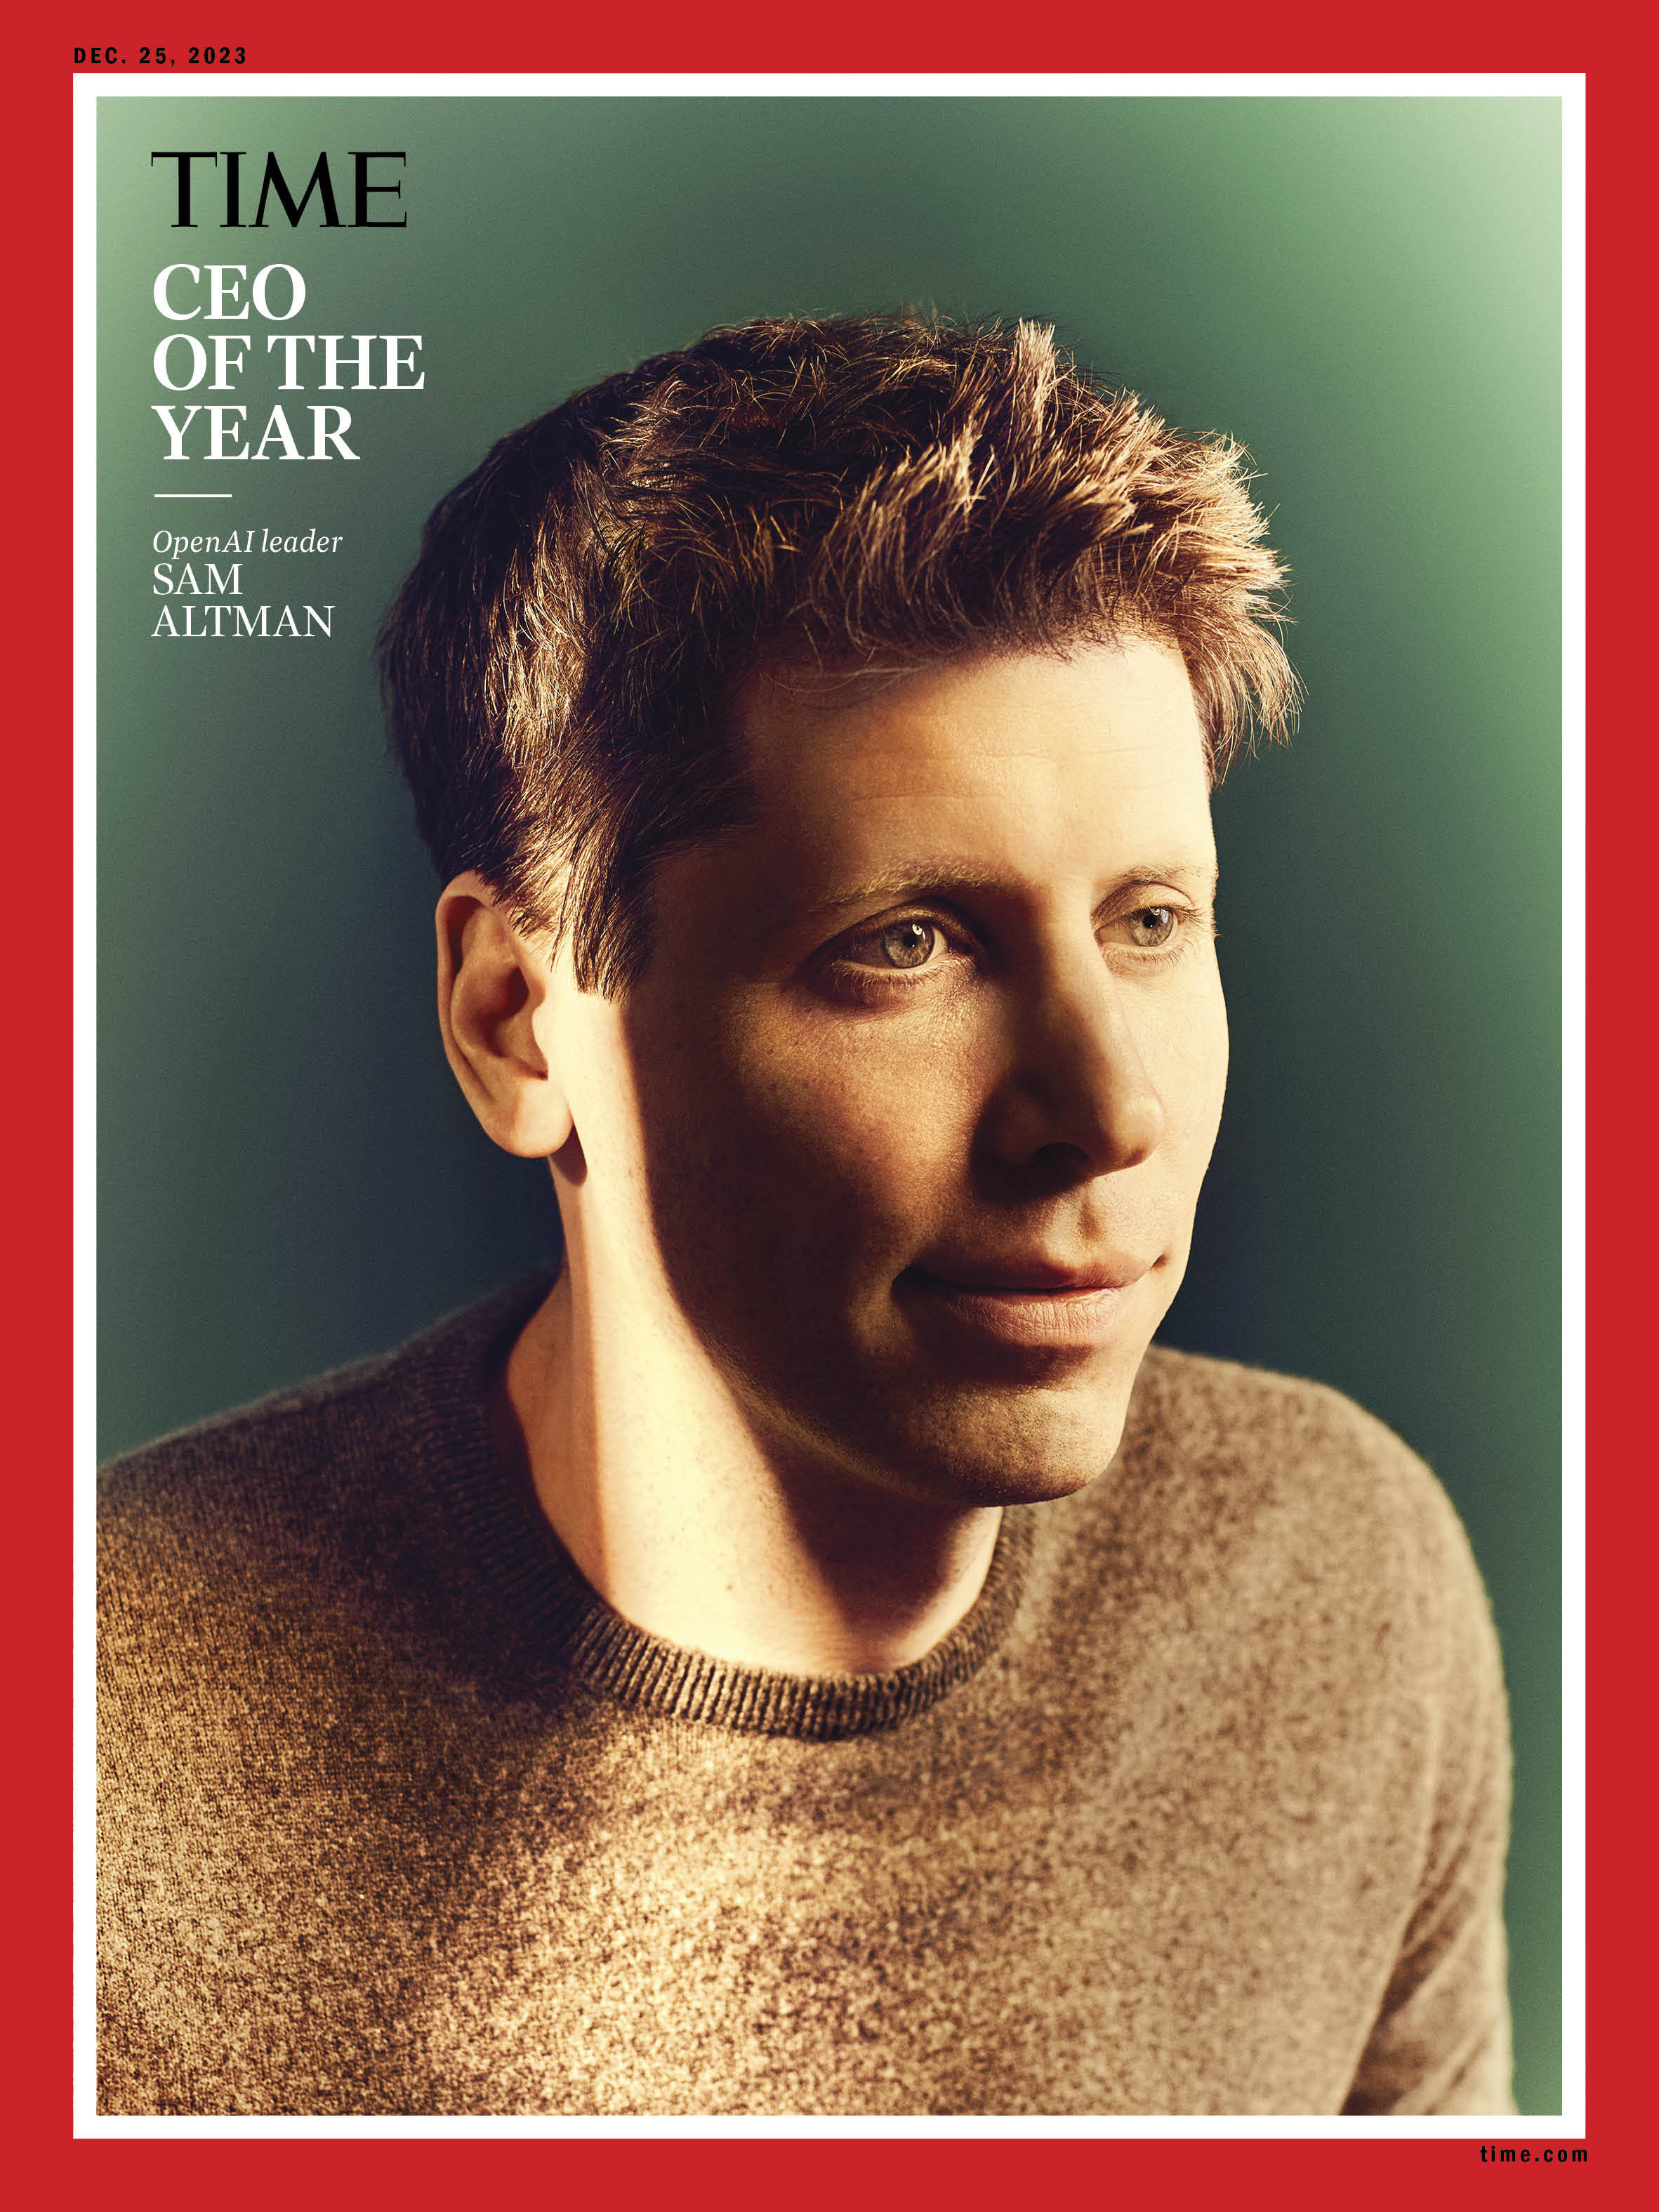 TIME CEO of the Year Sam Altman